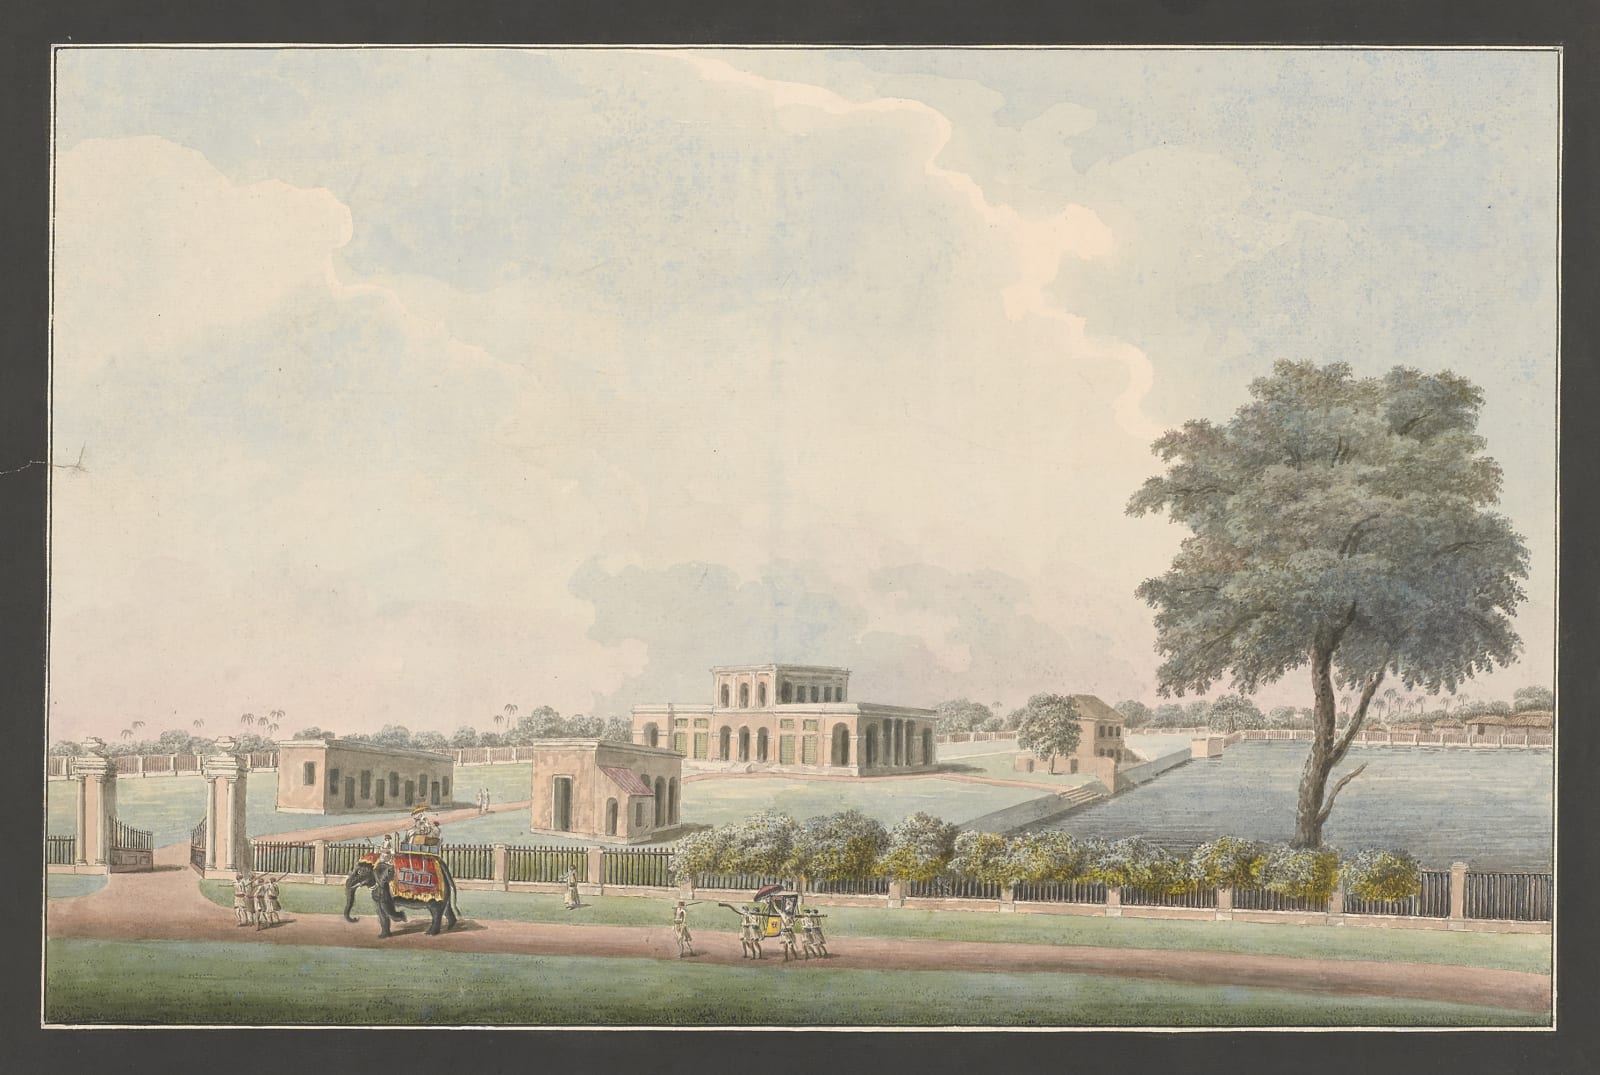 A double-storeyed house with single-storeyed wings beside a reservoir with a family approaching by elephant and palanquin, Murshidabad, 1795–1810